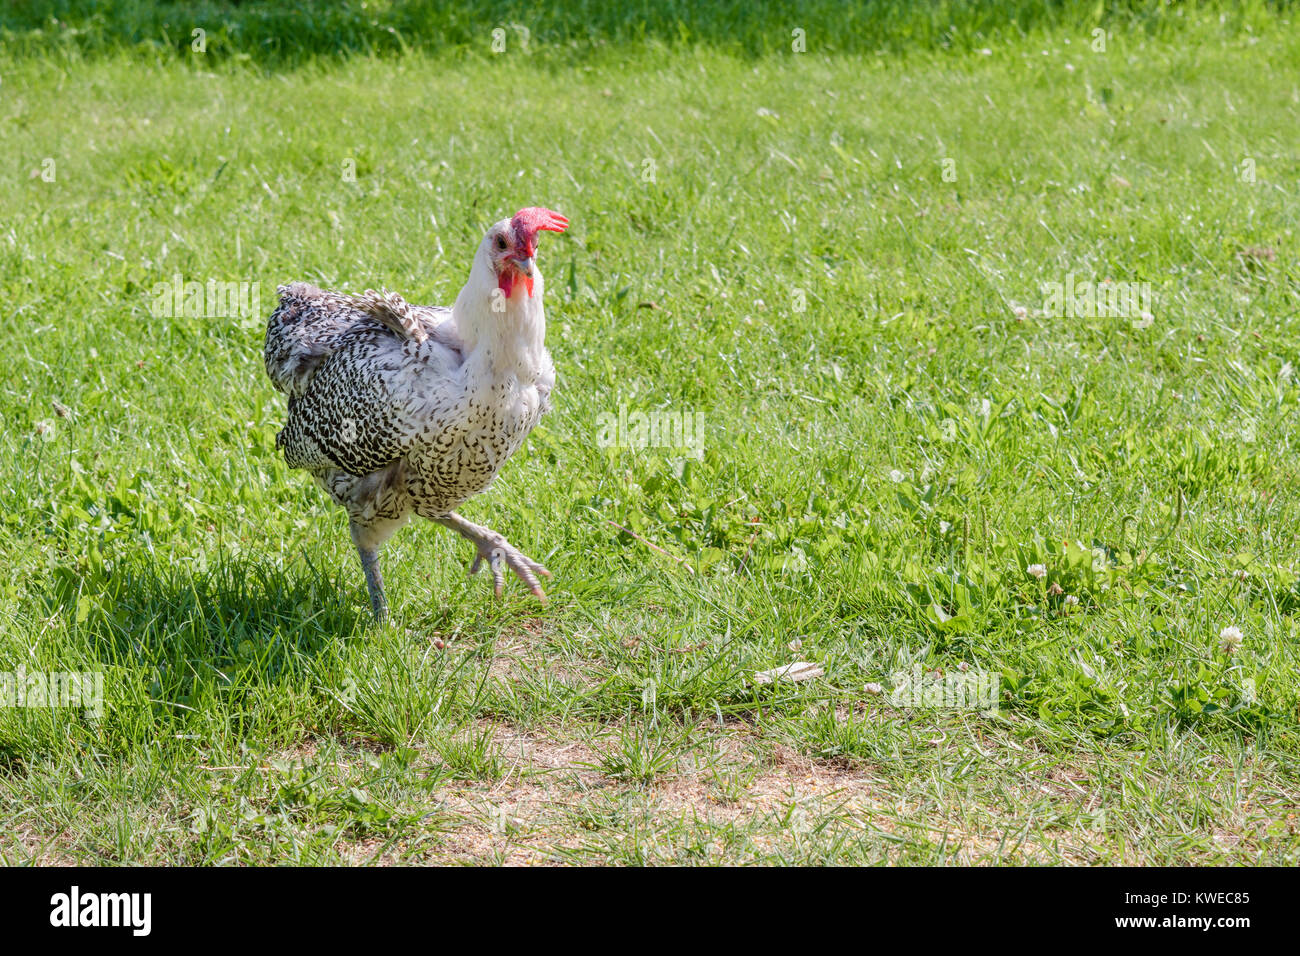 A free range chicken is walking in a grass field on a sunny day in summer. Stock Photo